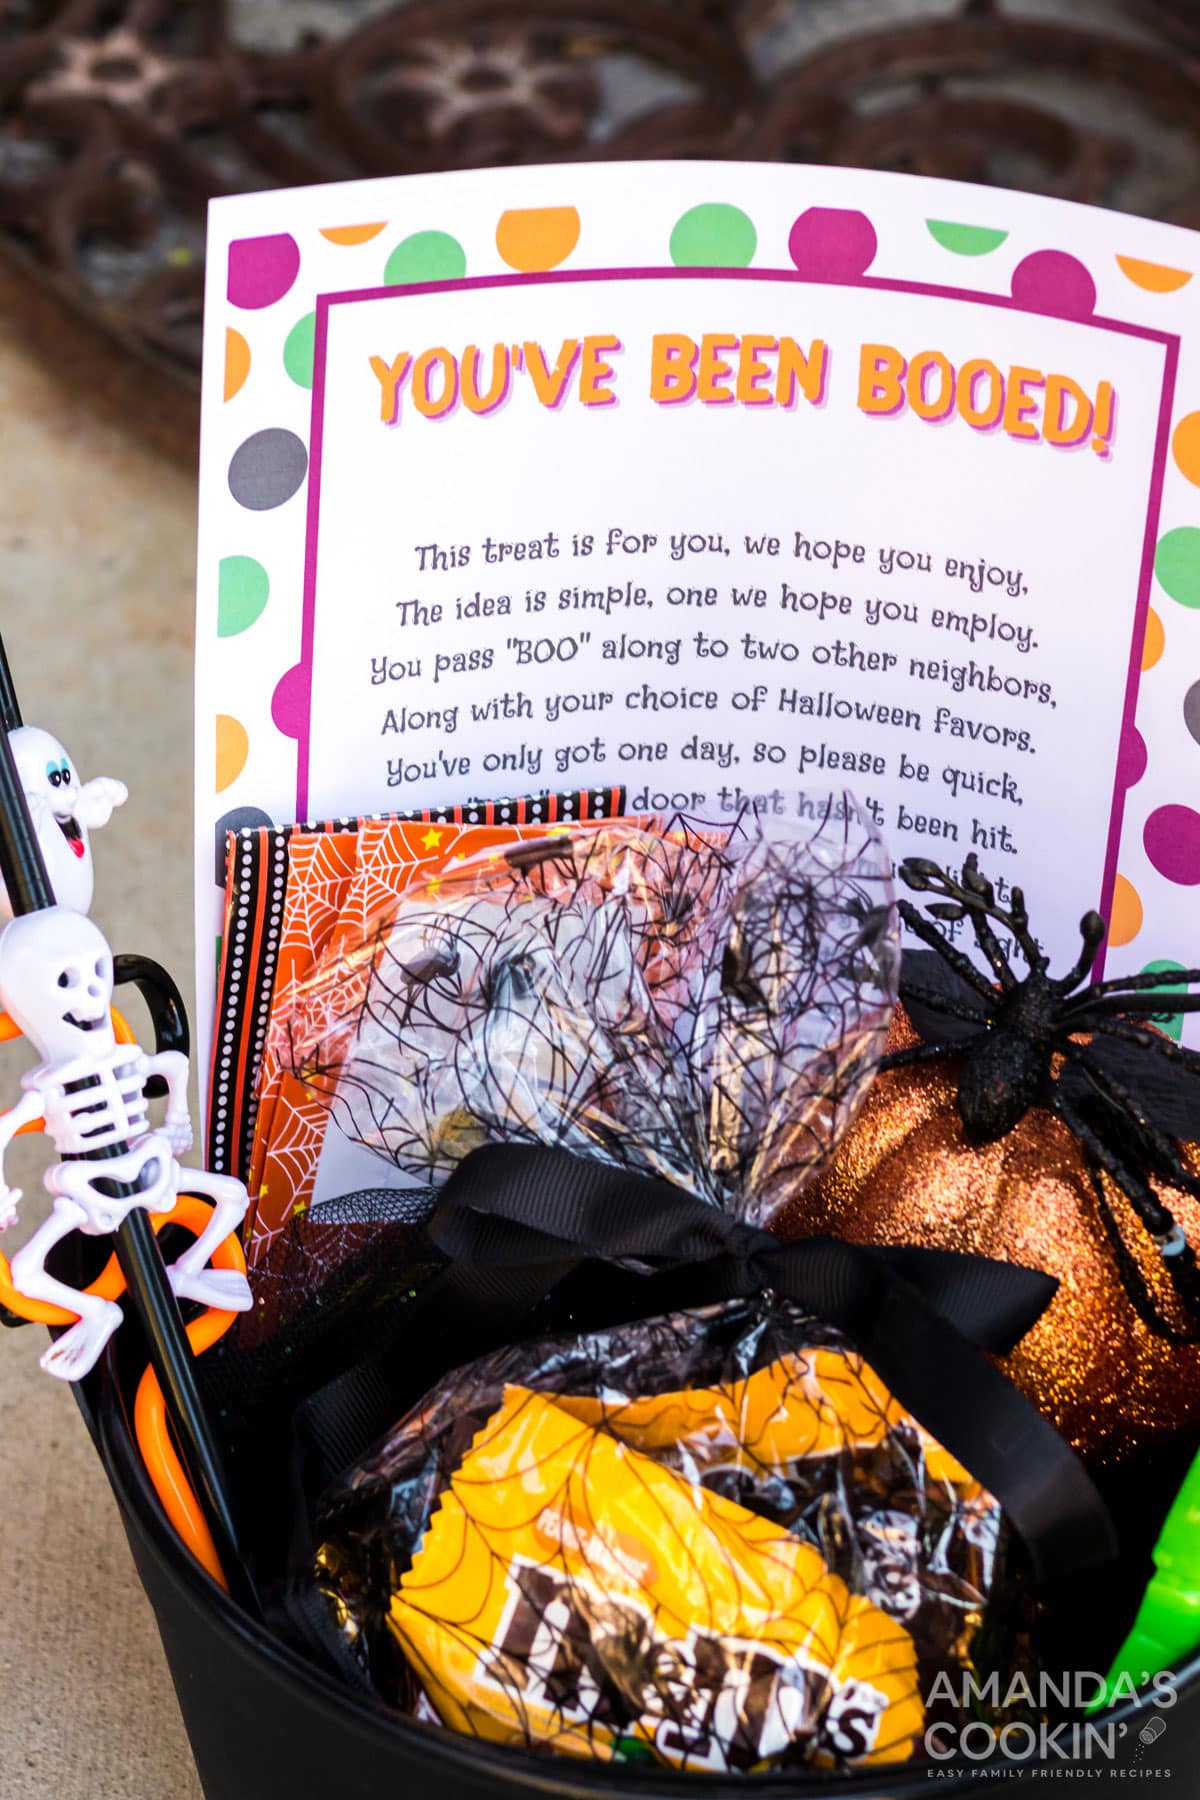 bucket of candy with you've been boo'd printout